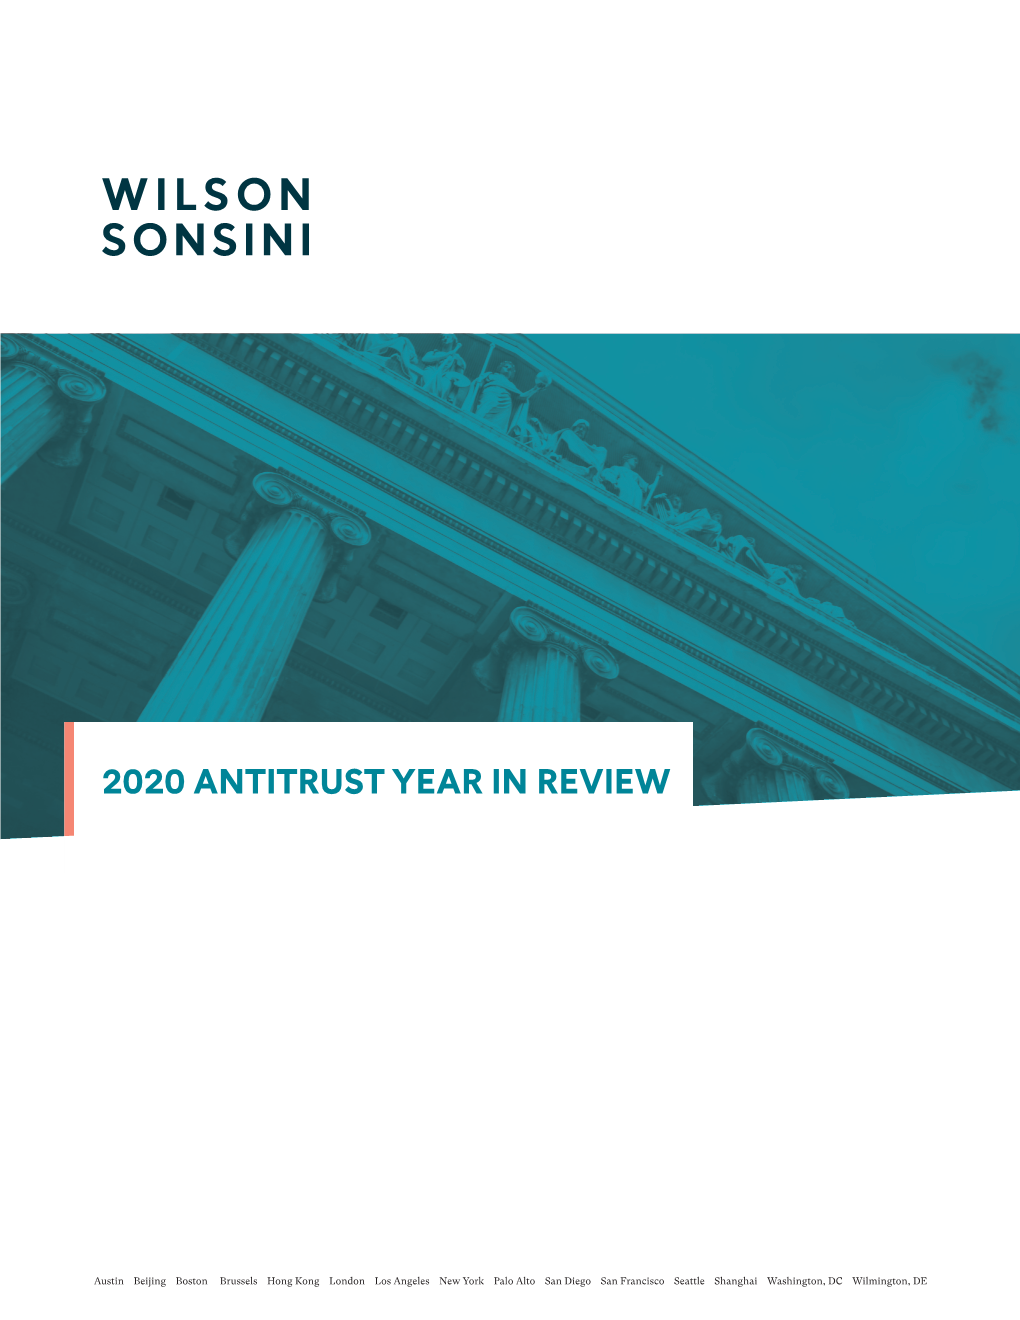 2020 Antitrust Year in Review